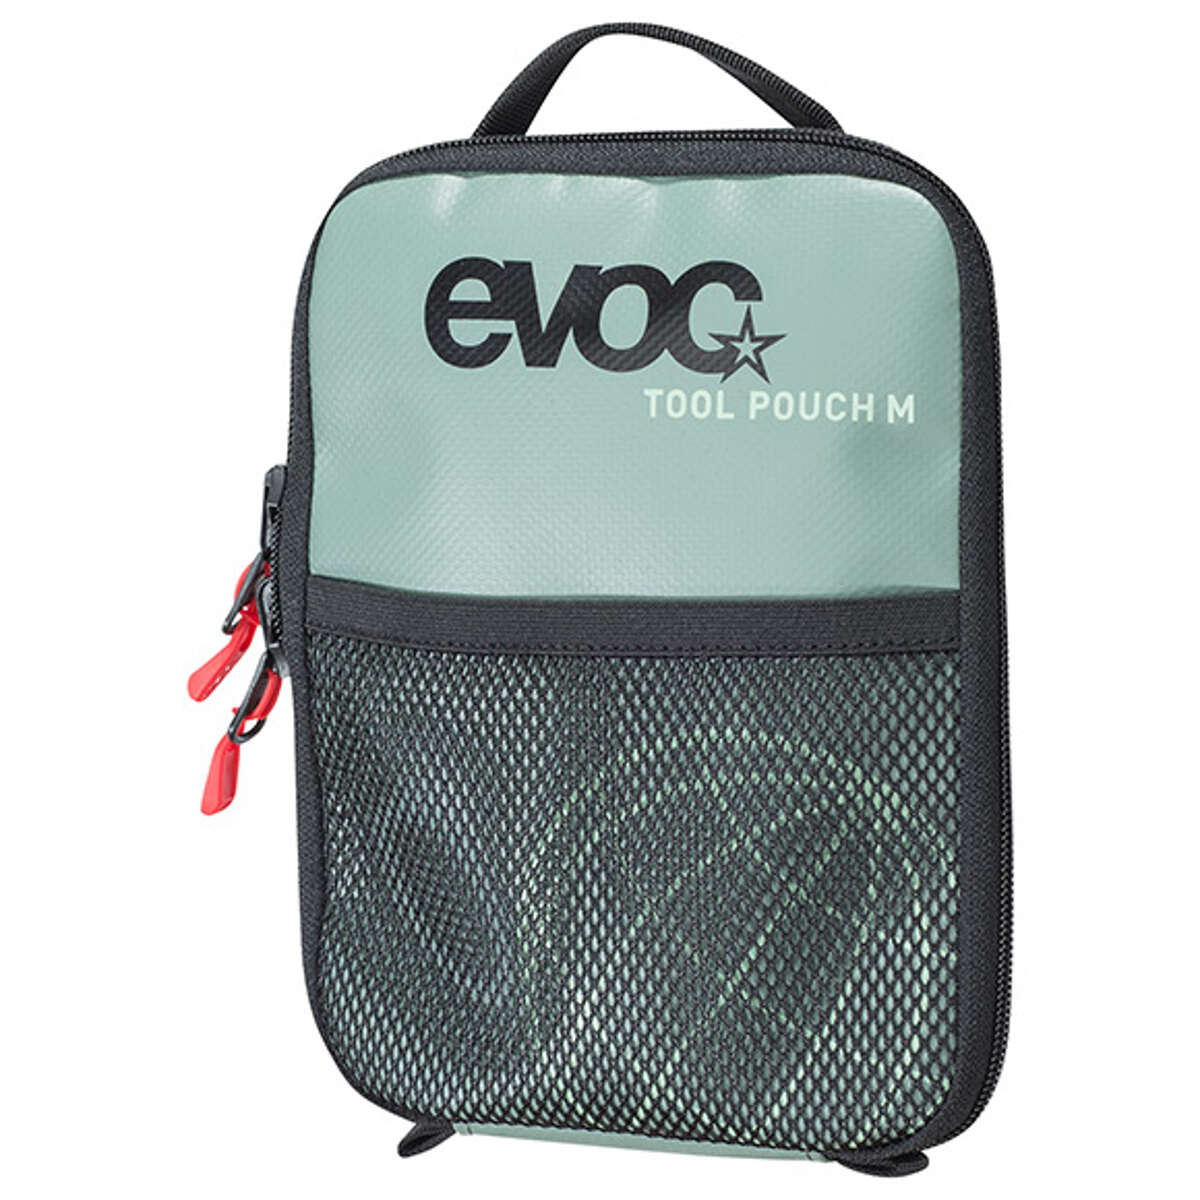 Evoc Tool Bag Tool Pouch 0.6L - Olive